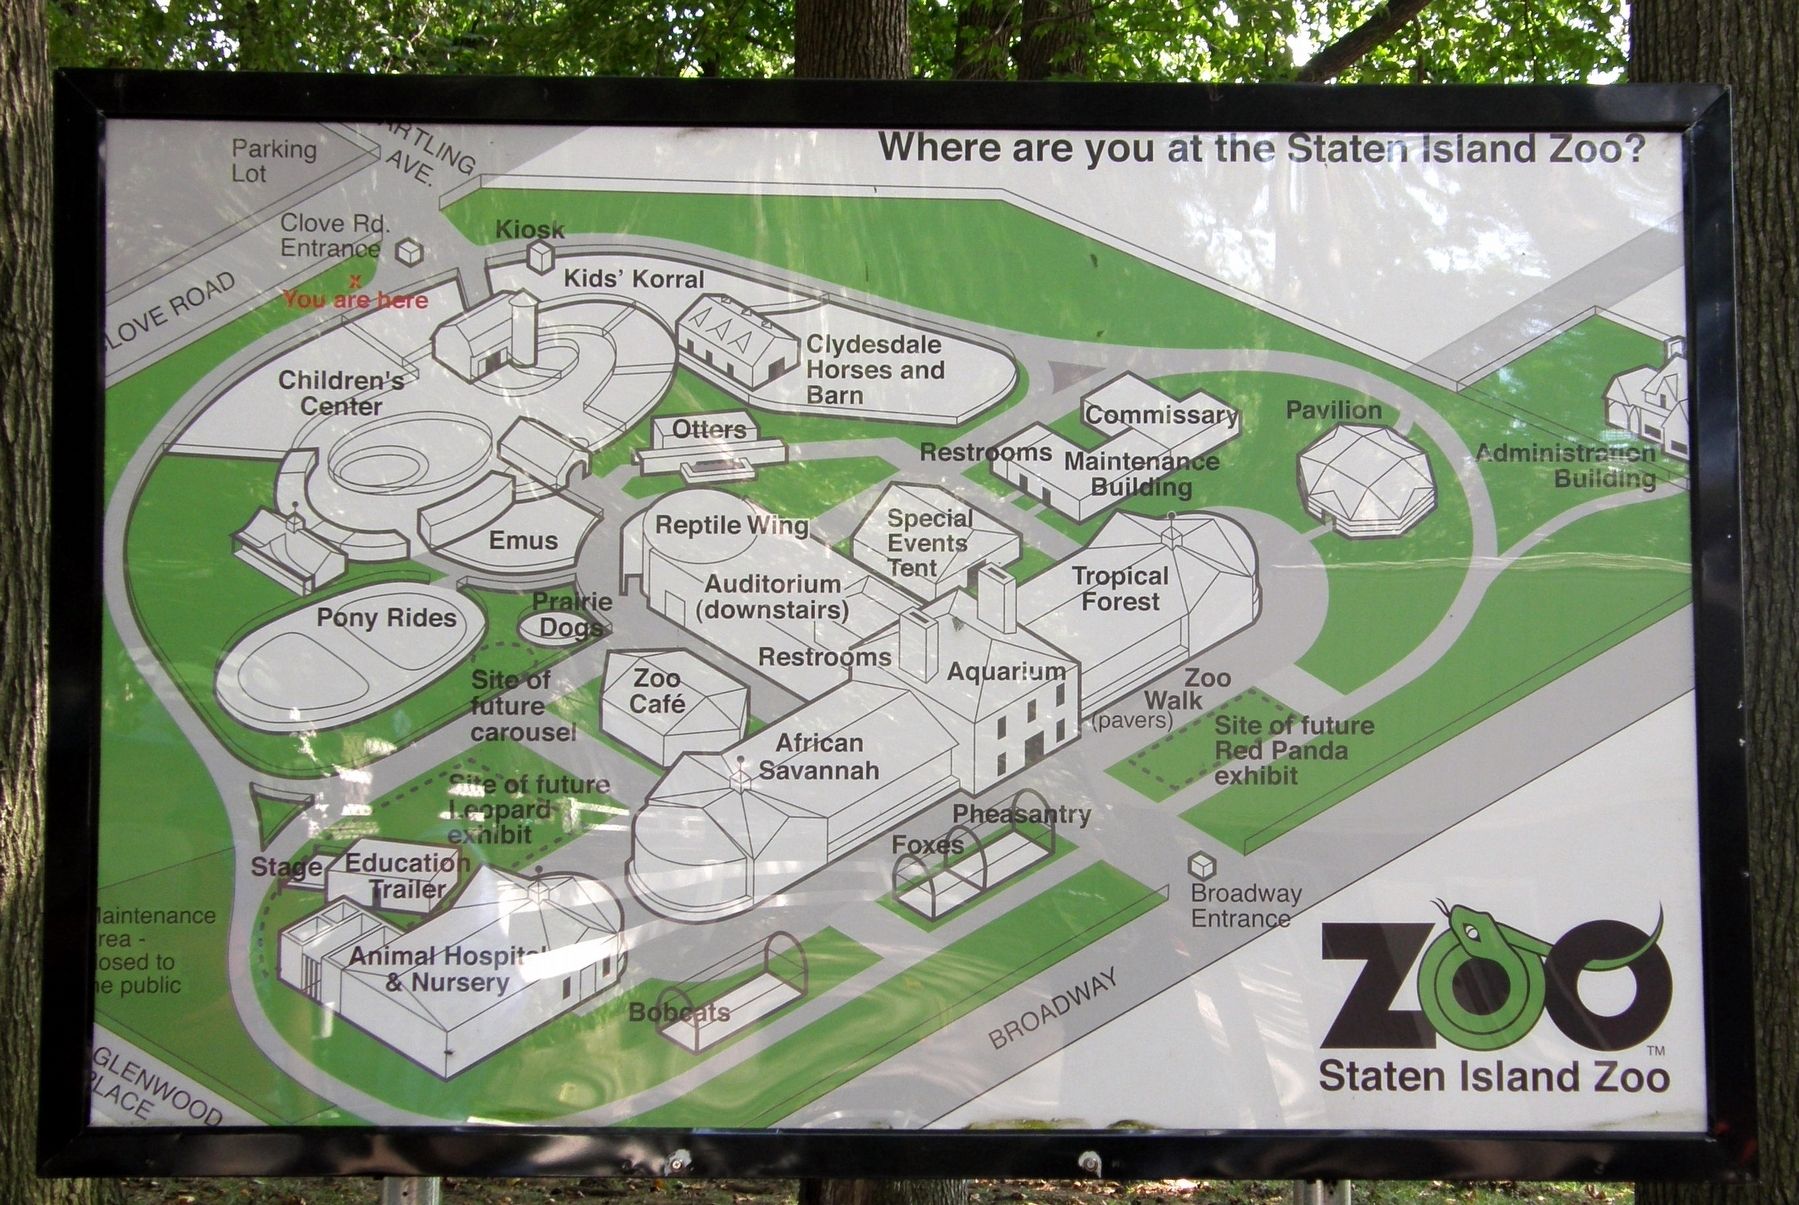 The Staten Island Zoo layout image. Click for full size.